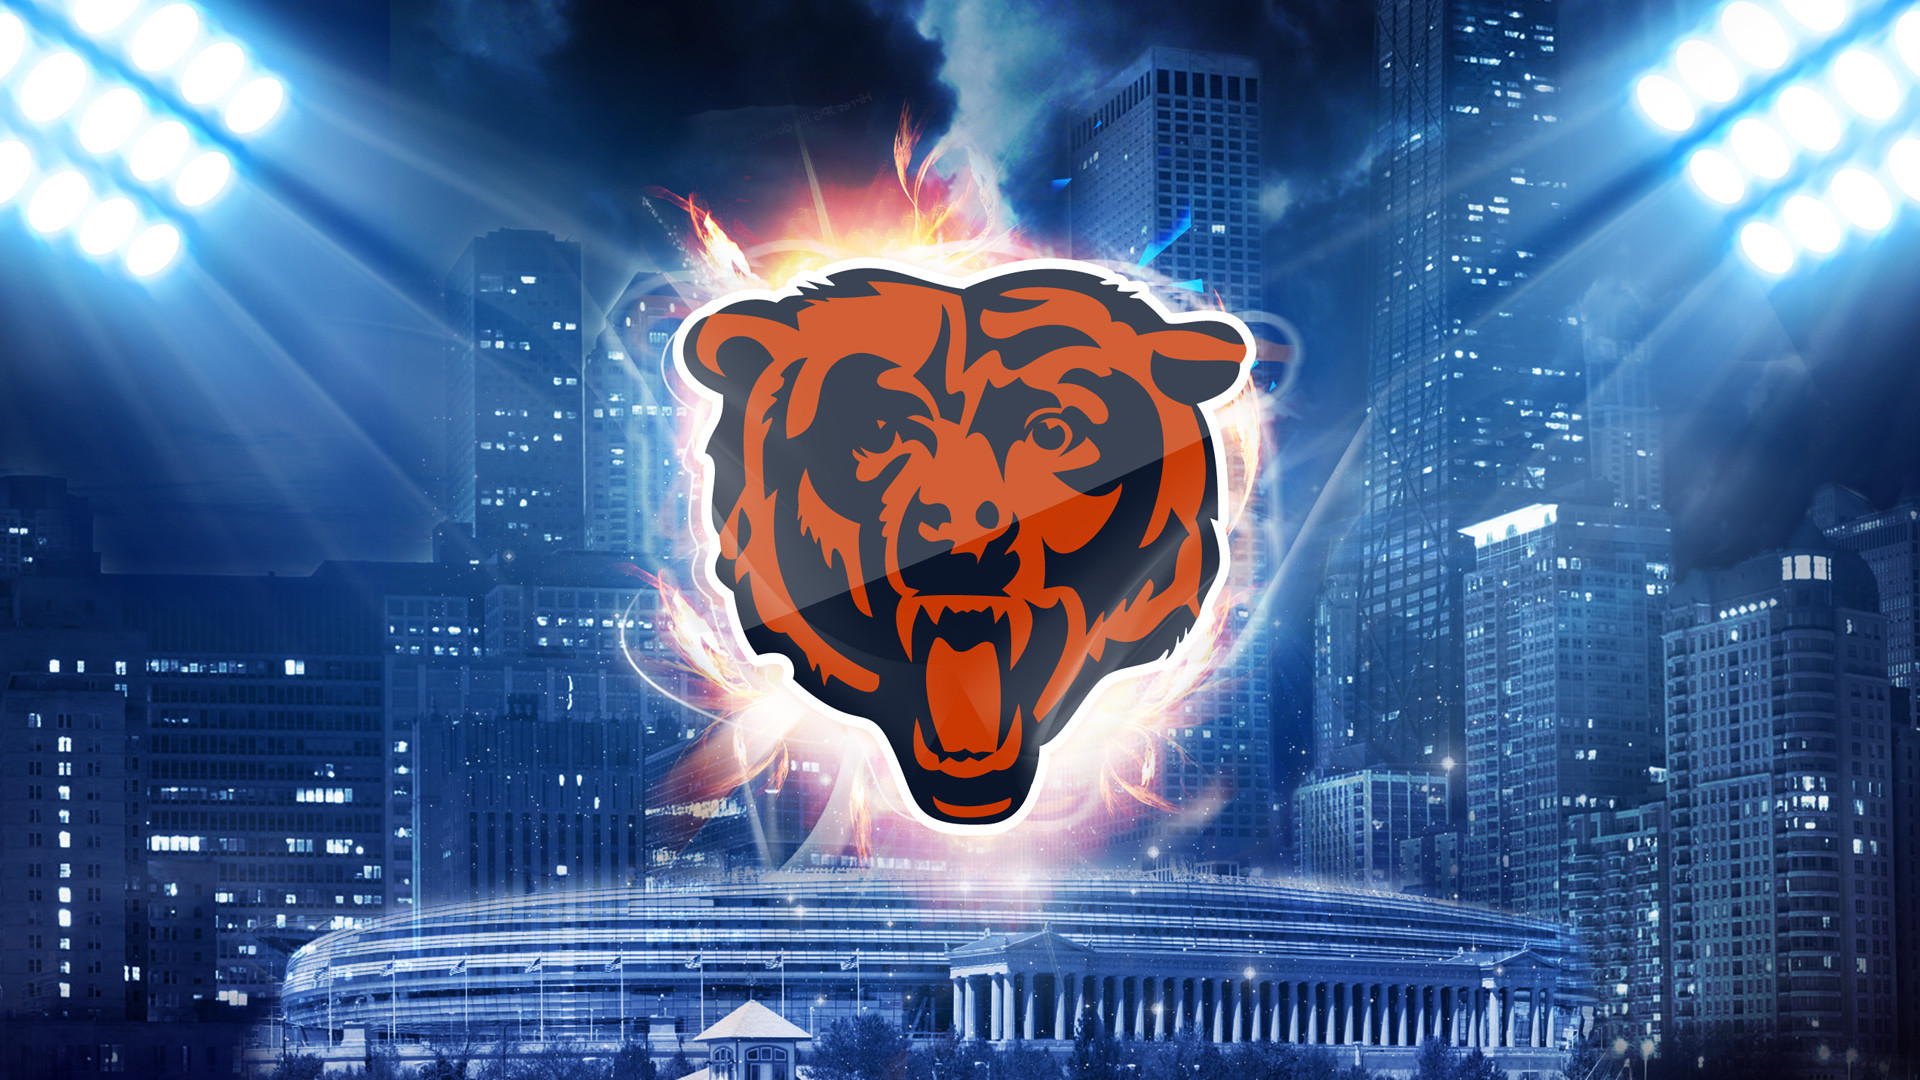 1920x1080 Chicago Bears | 2013 Wallpapers